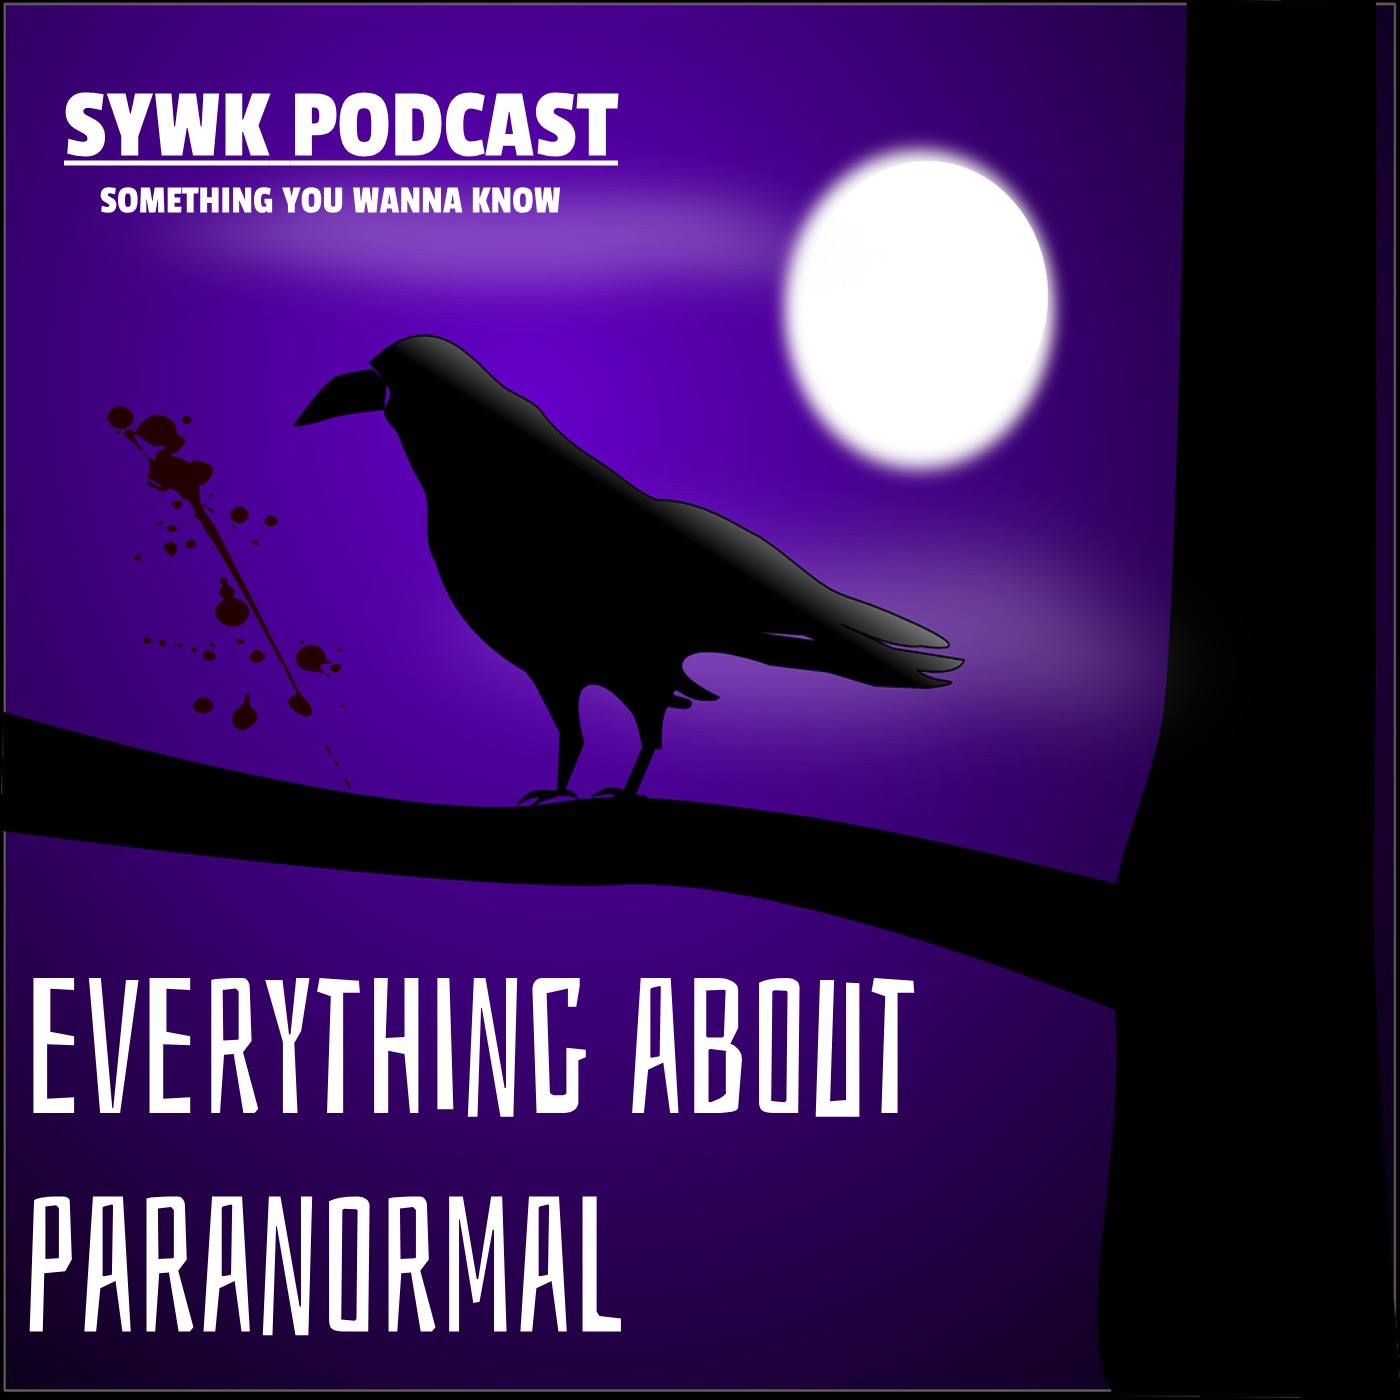 Podcast Update | SYWK Podcast- Horror Stories